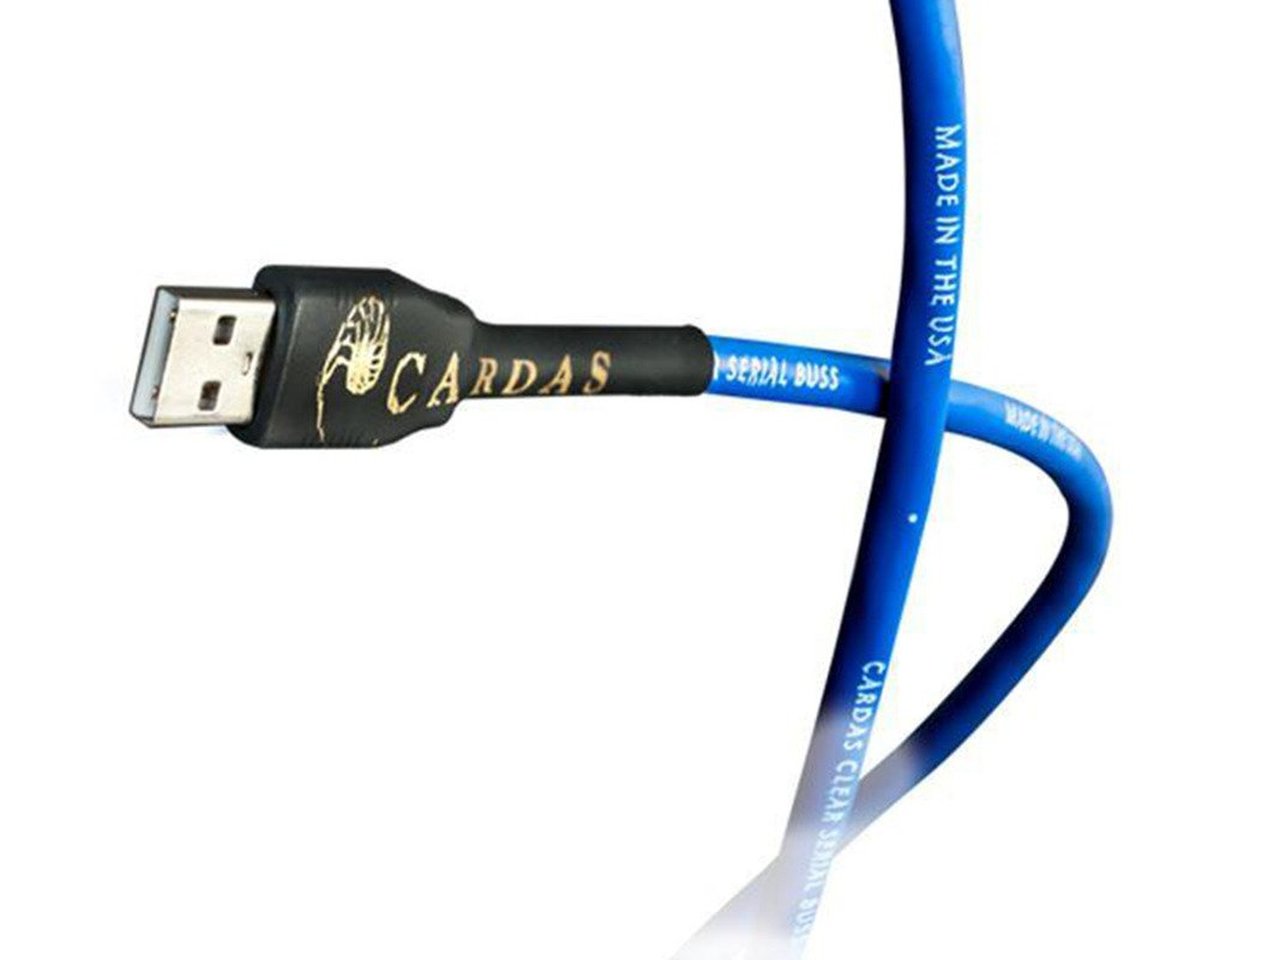 Cardas Clear Serial Bus Rev 1USB Cable